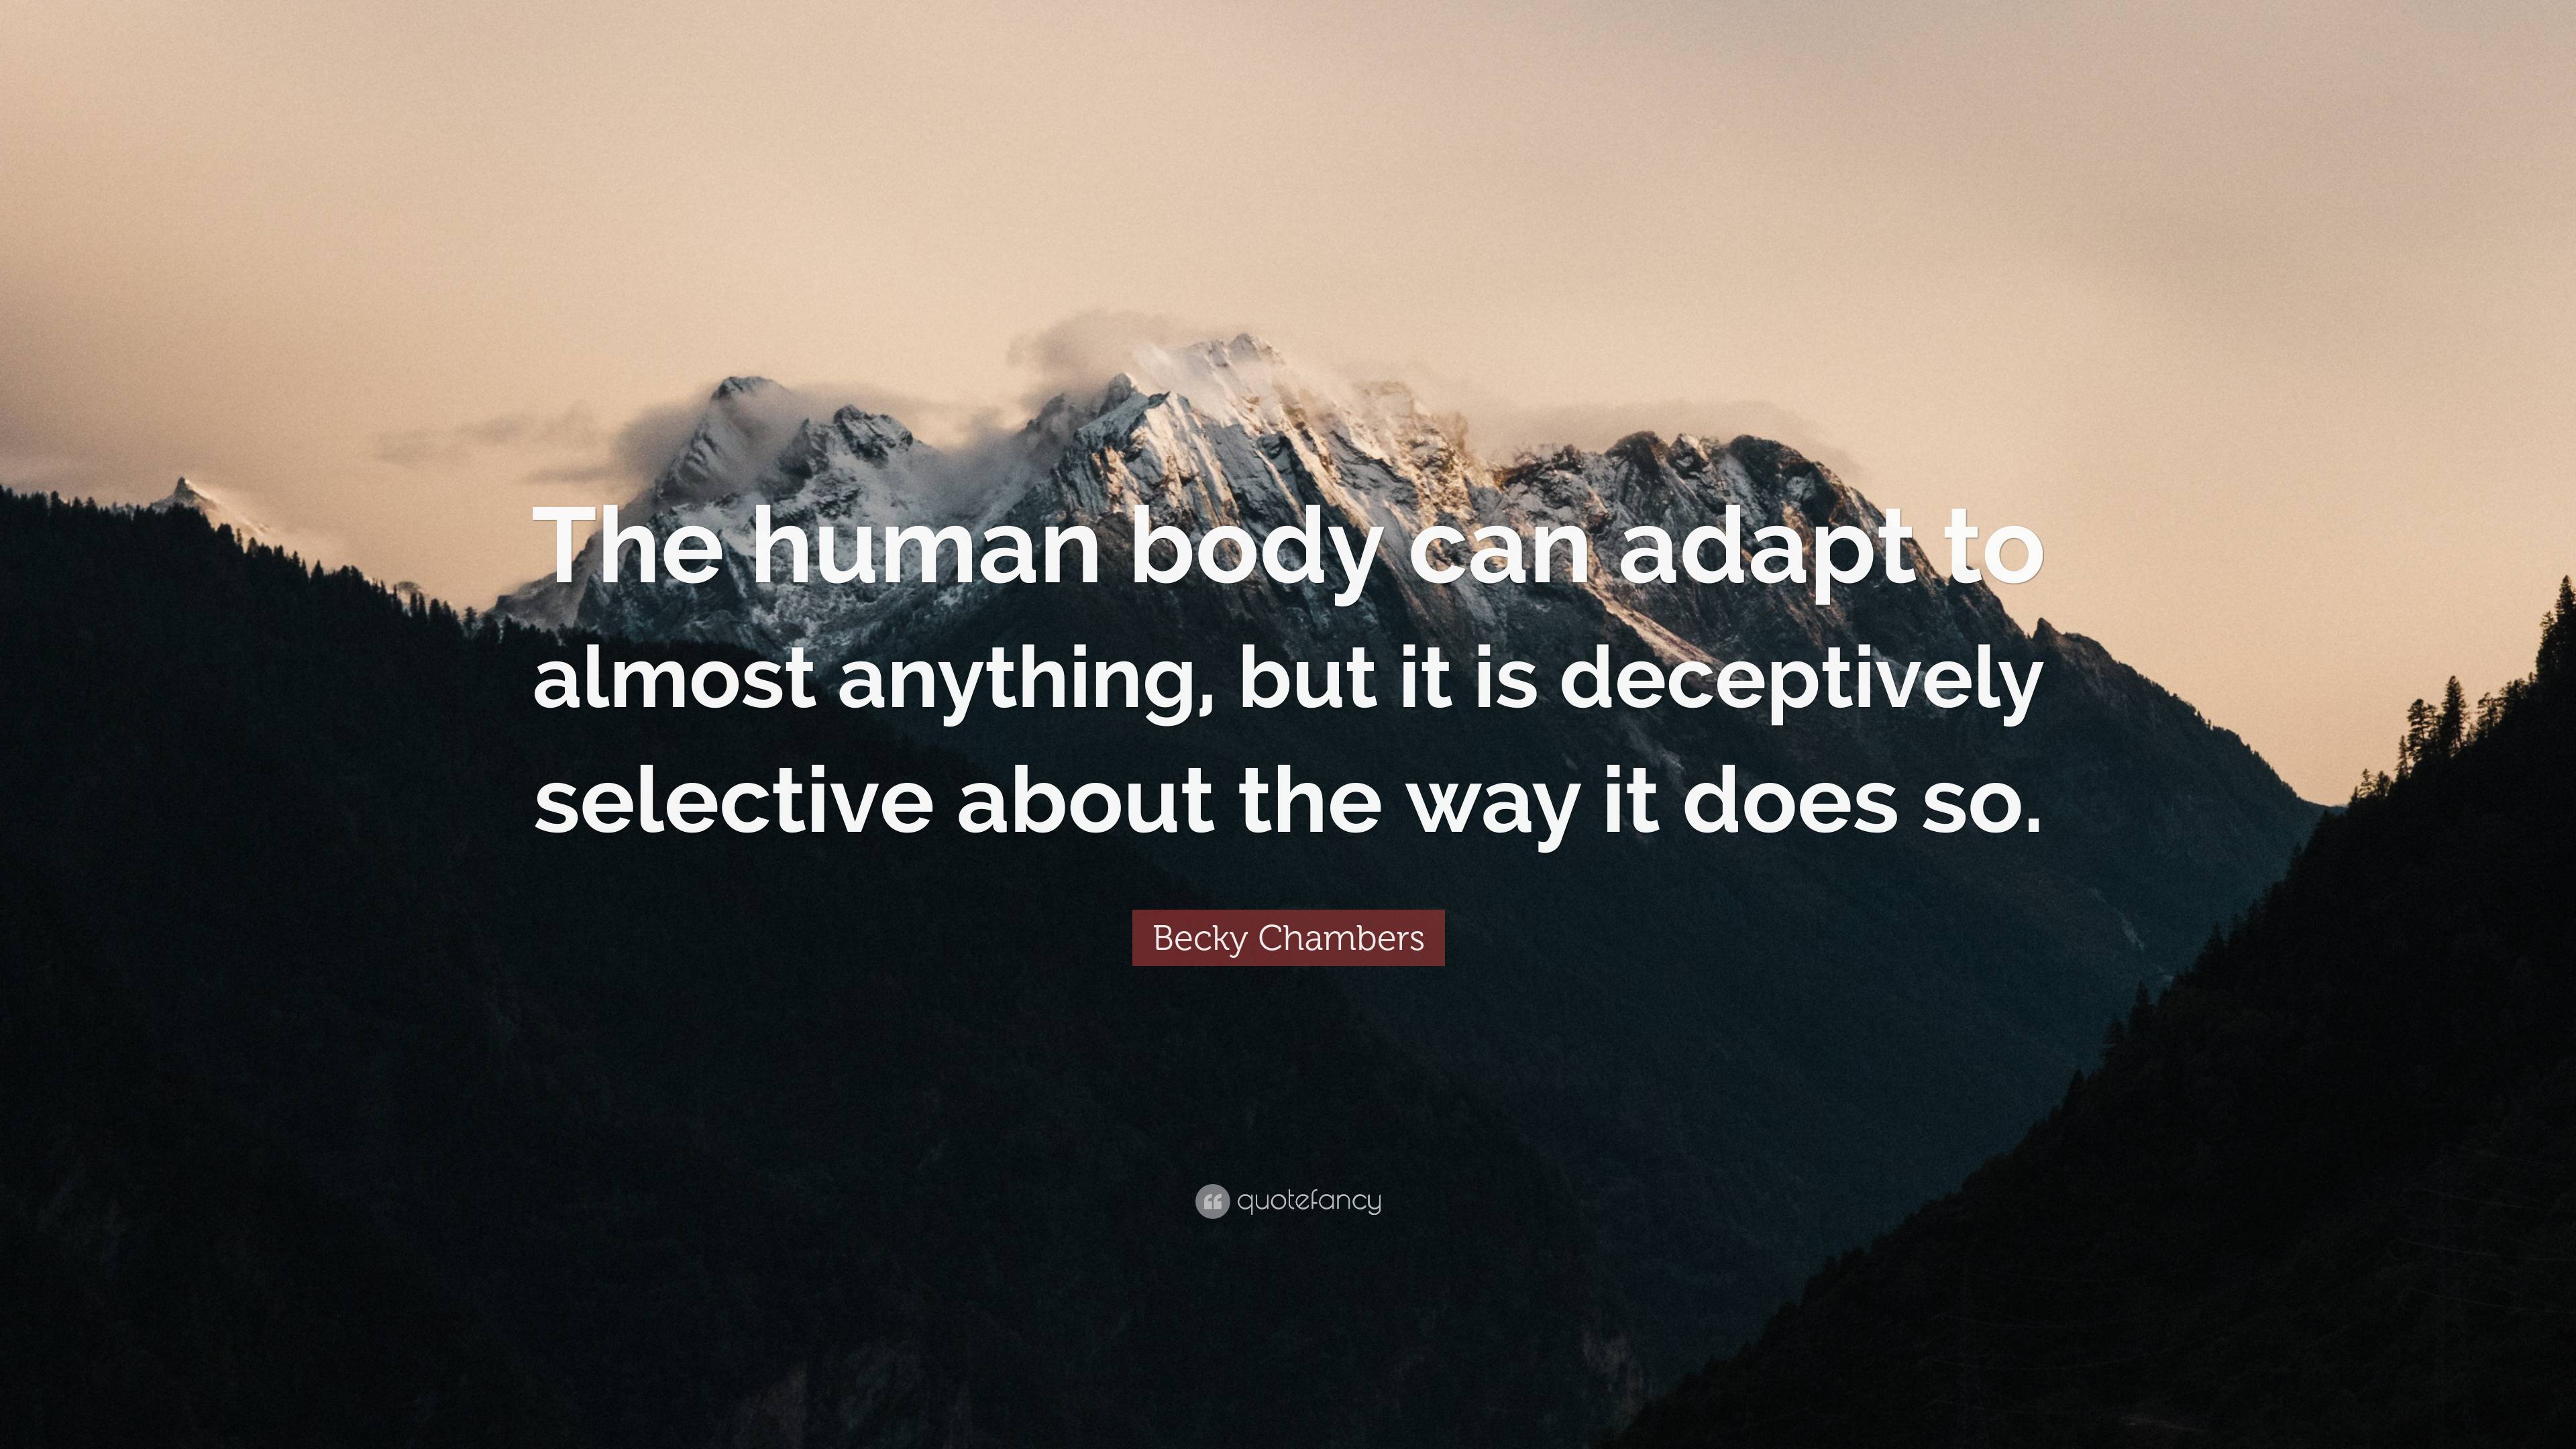 Becky Chambers Quote: “The human body can adapt to almost anything